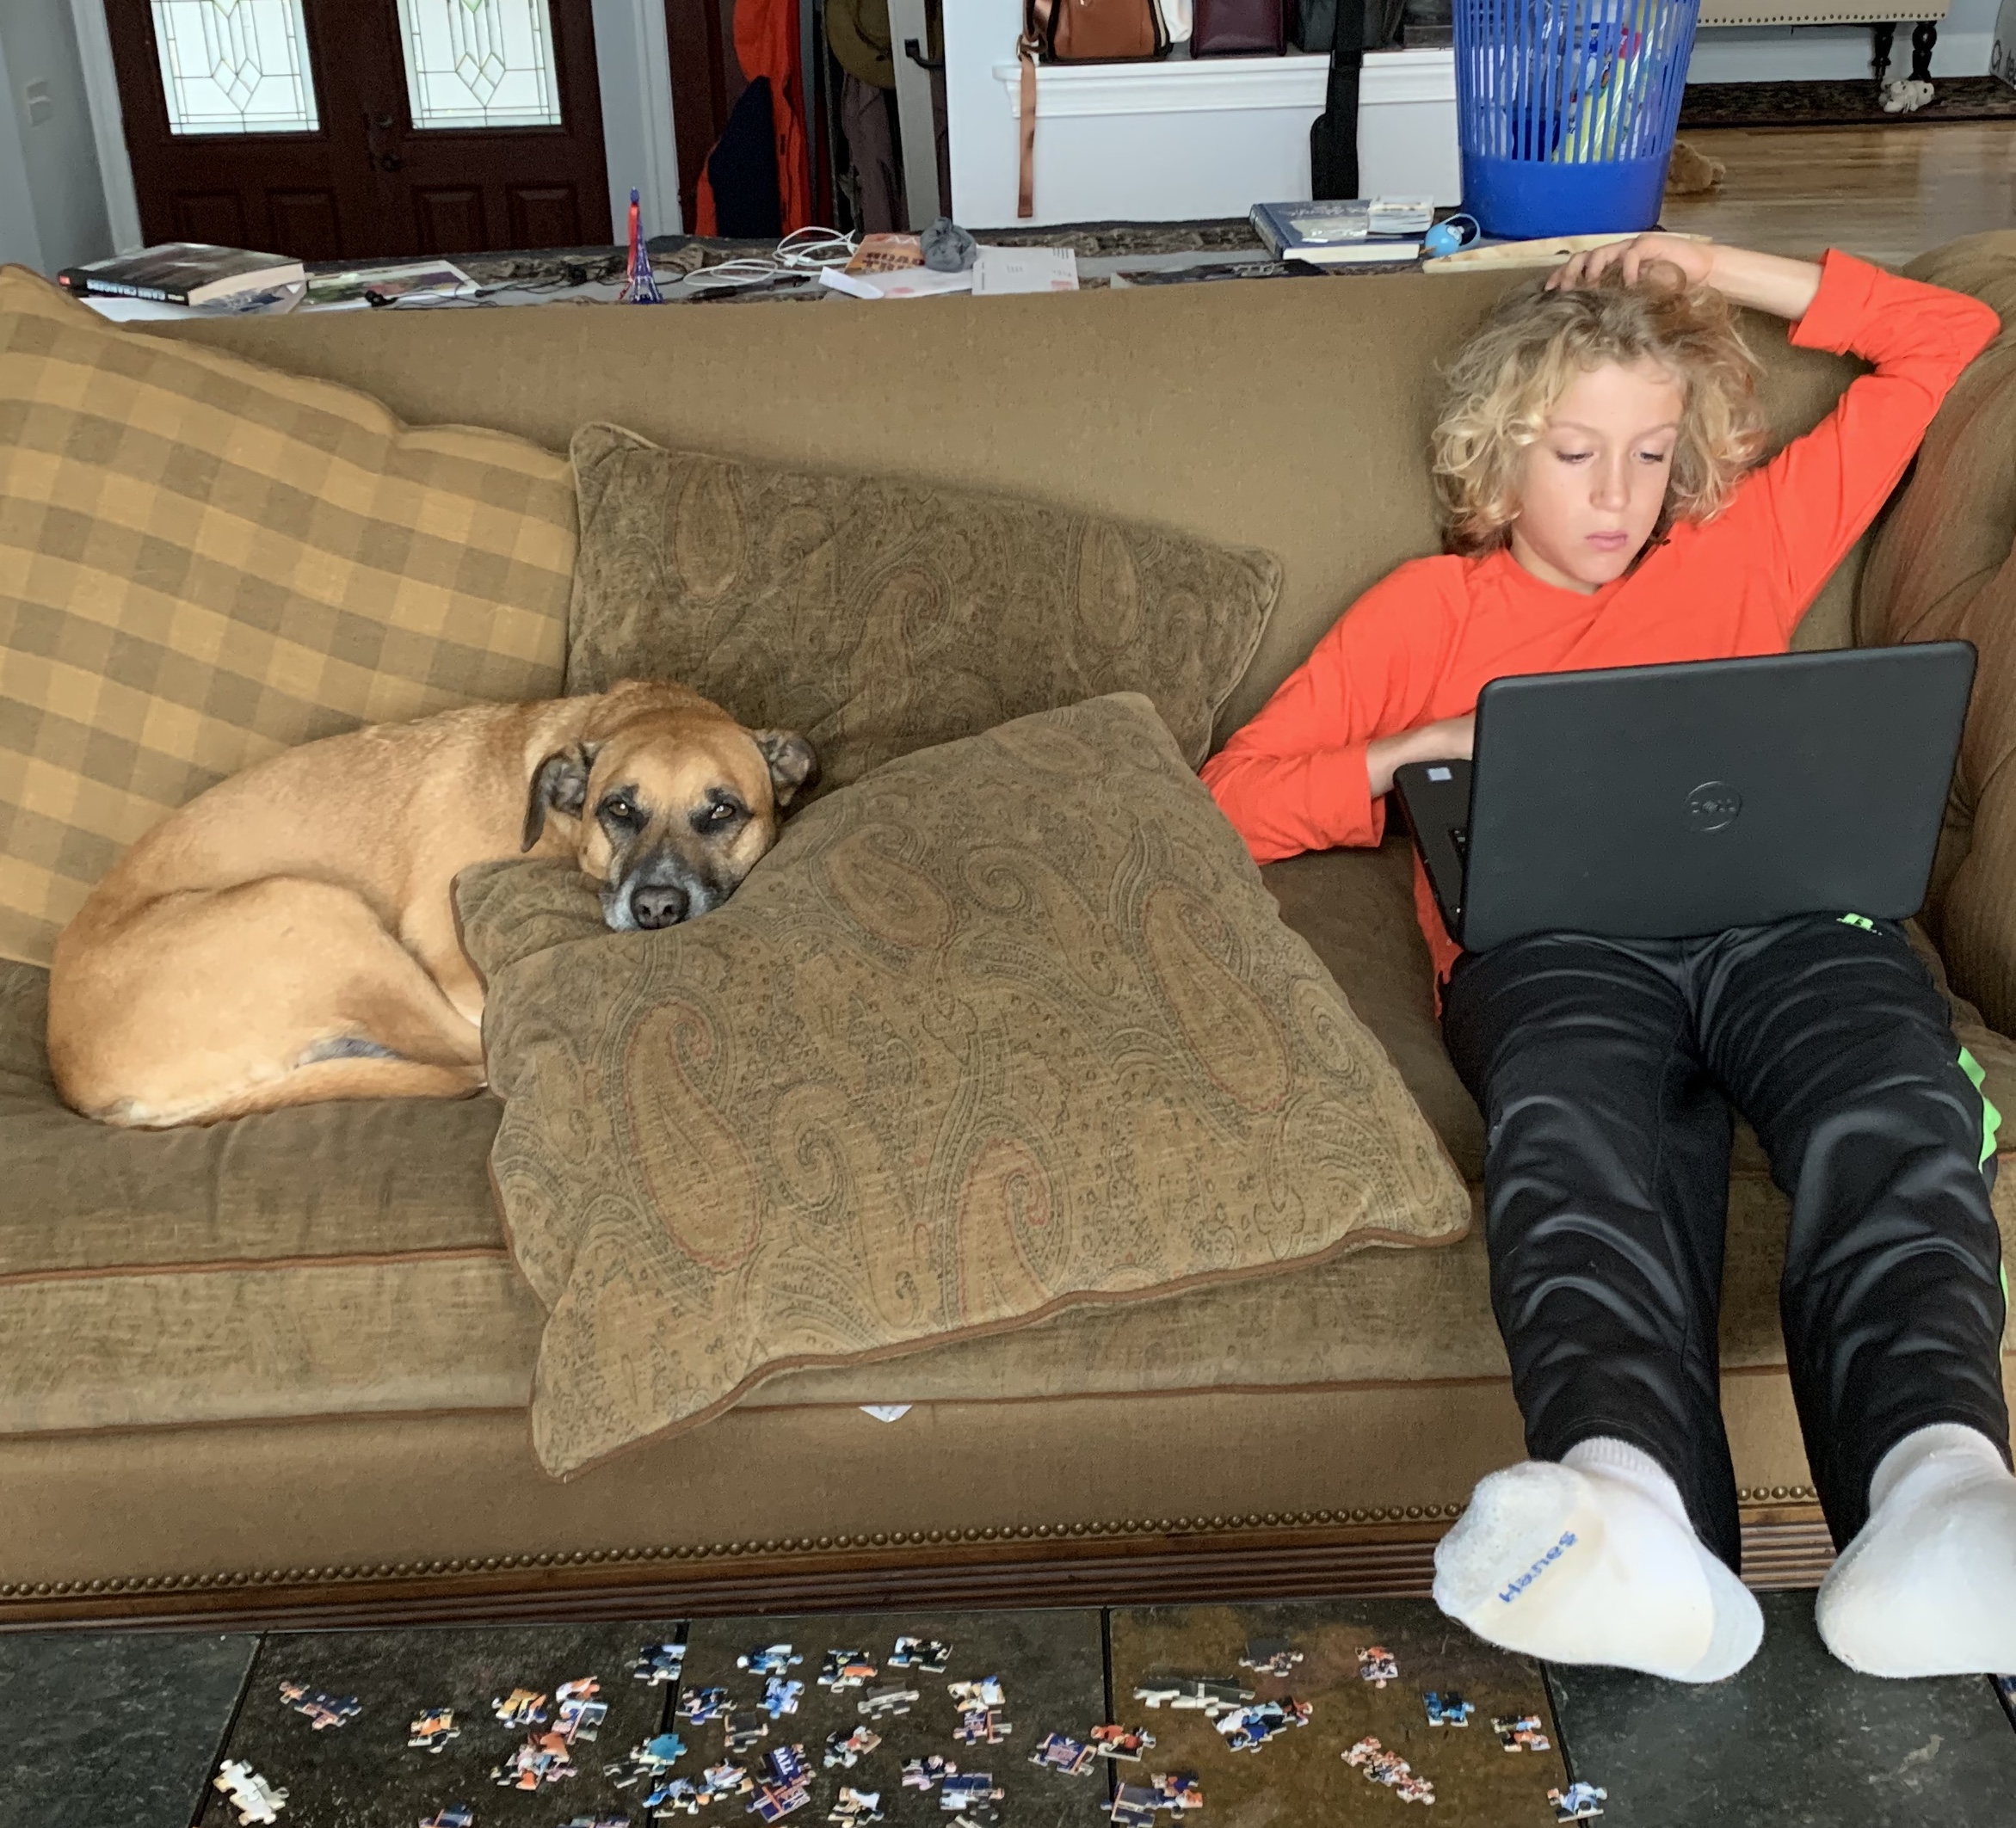 My son doing homeschool with our dog next to him.